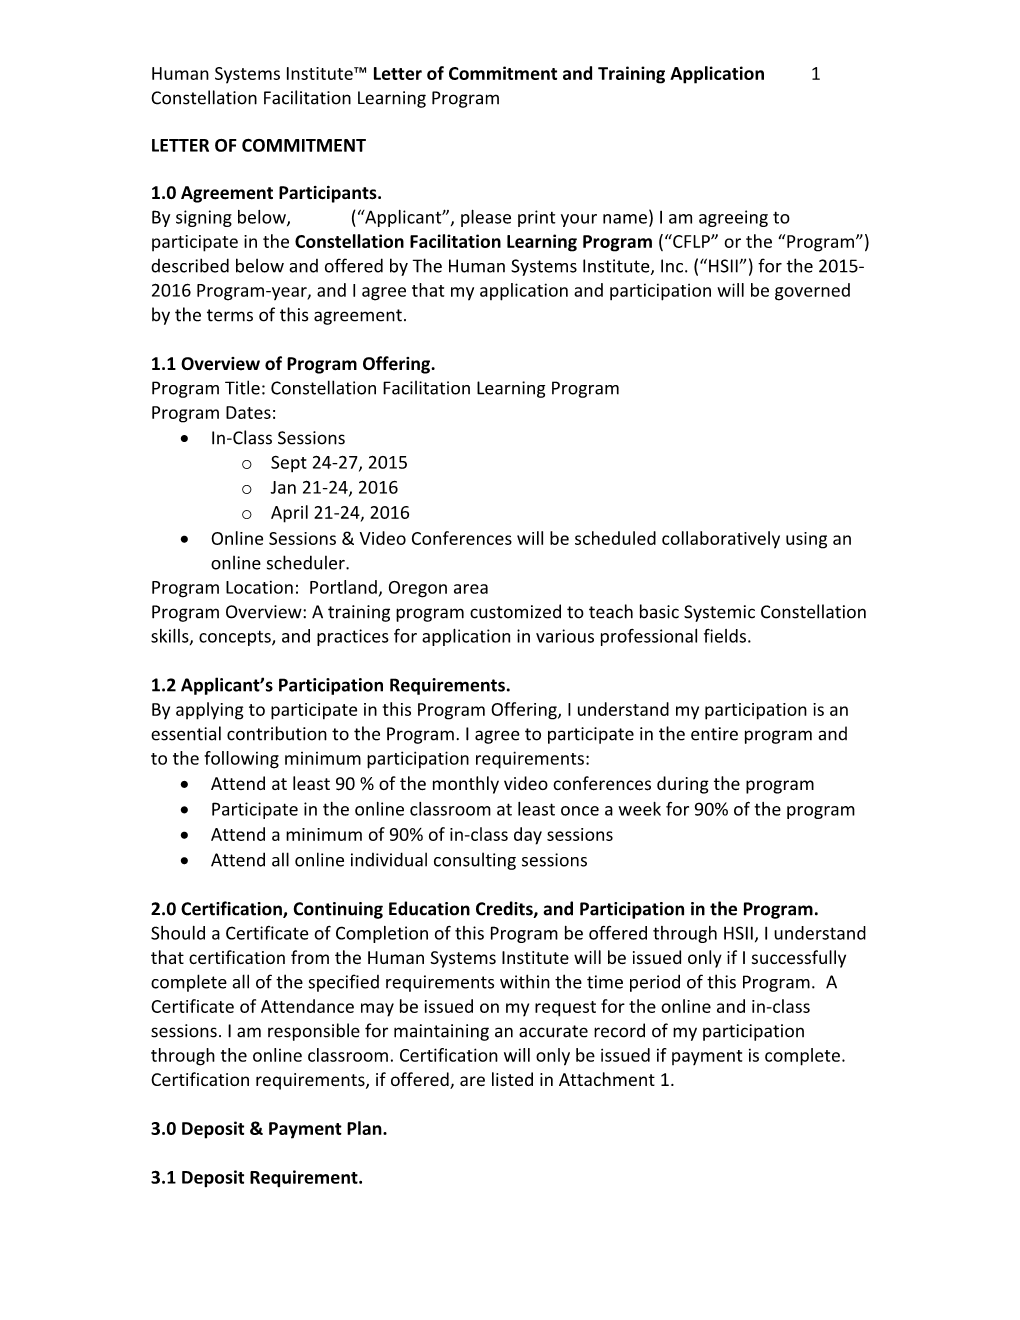 2010 Portland Training Application & Letter of Commitment